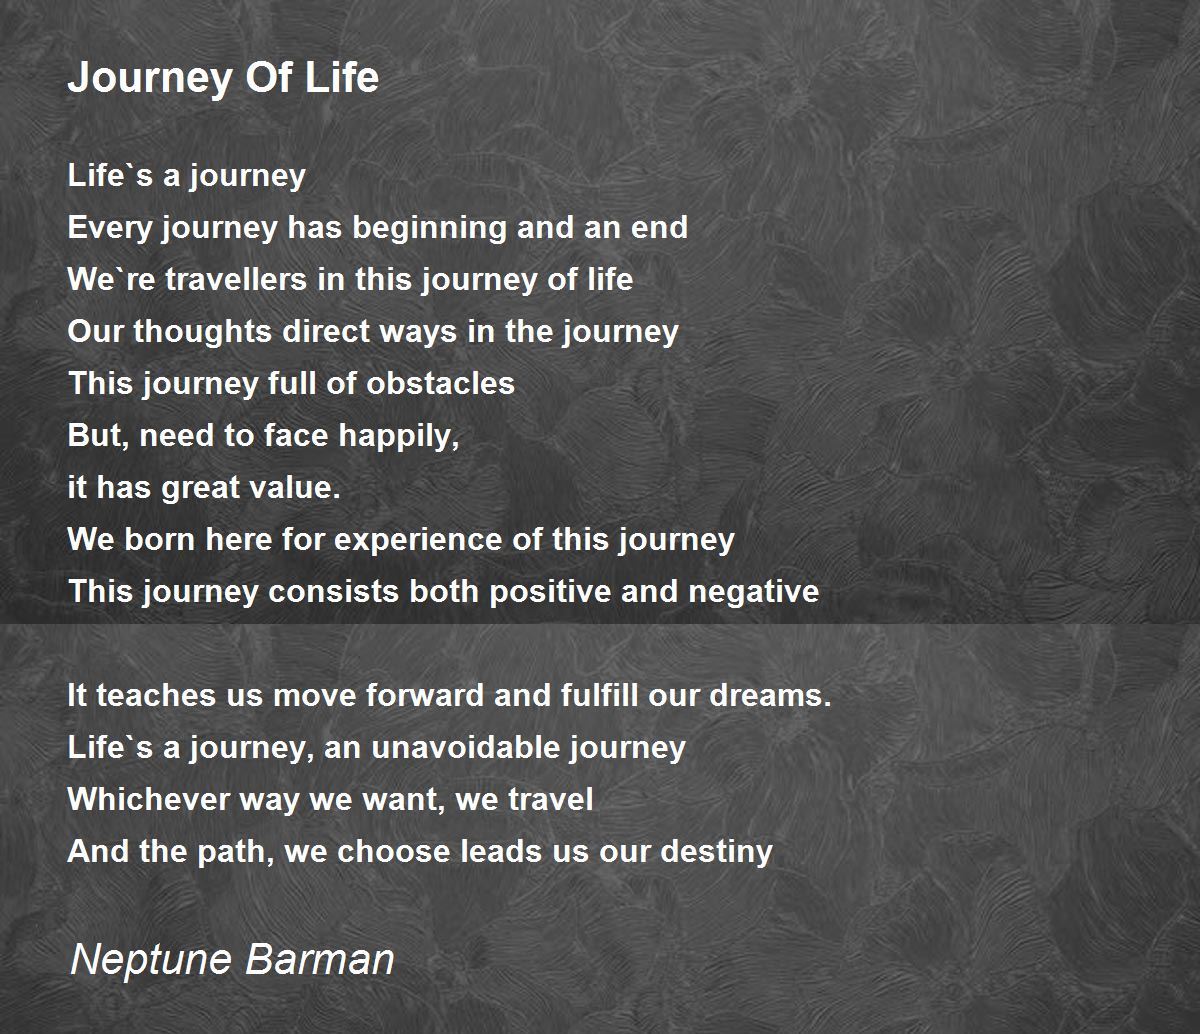 essay of life is a journey